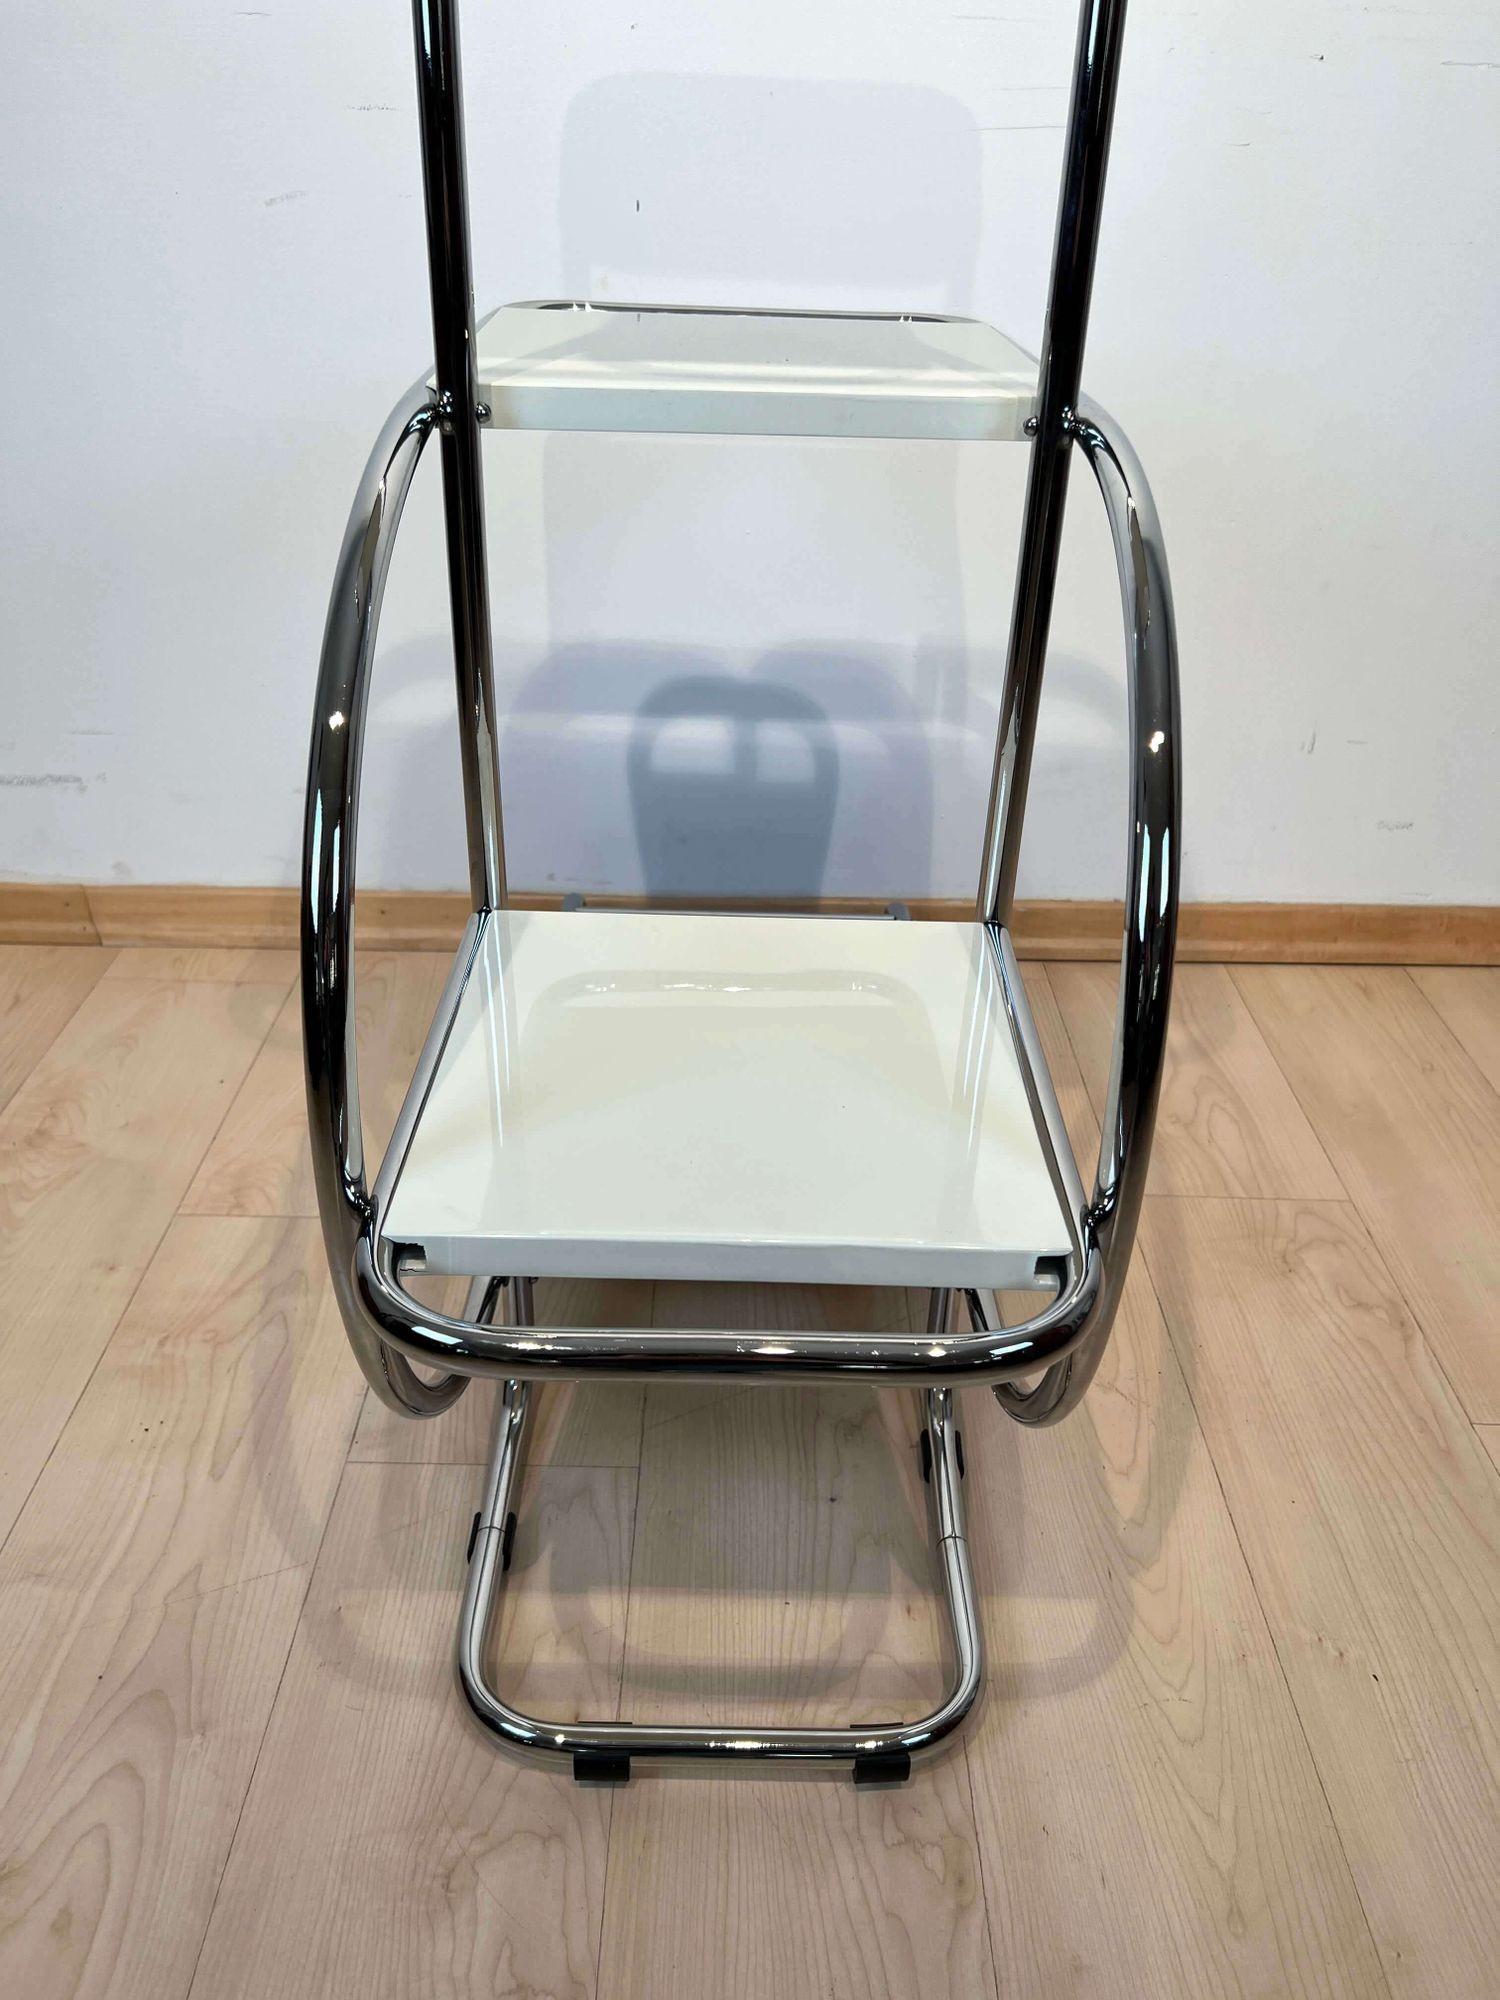 Bauhaus Steeltube Etagere, Creme-White Lacquer, Nickel Plate, Germany, 1930s For Sale 2